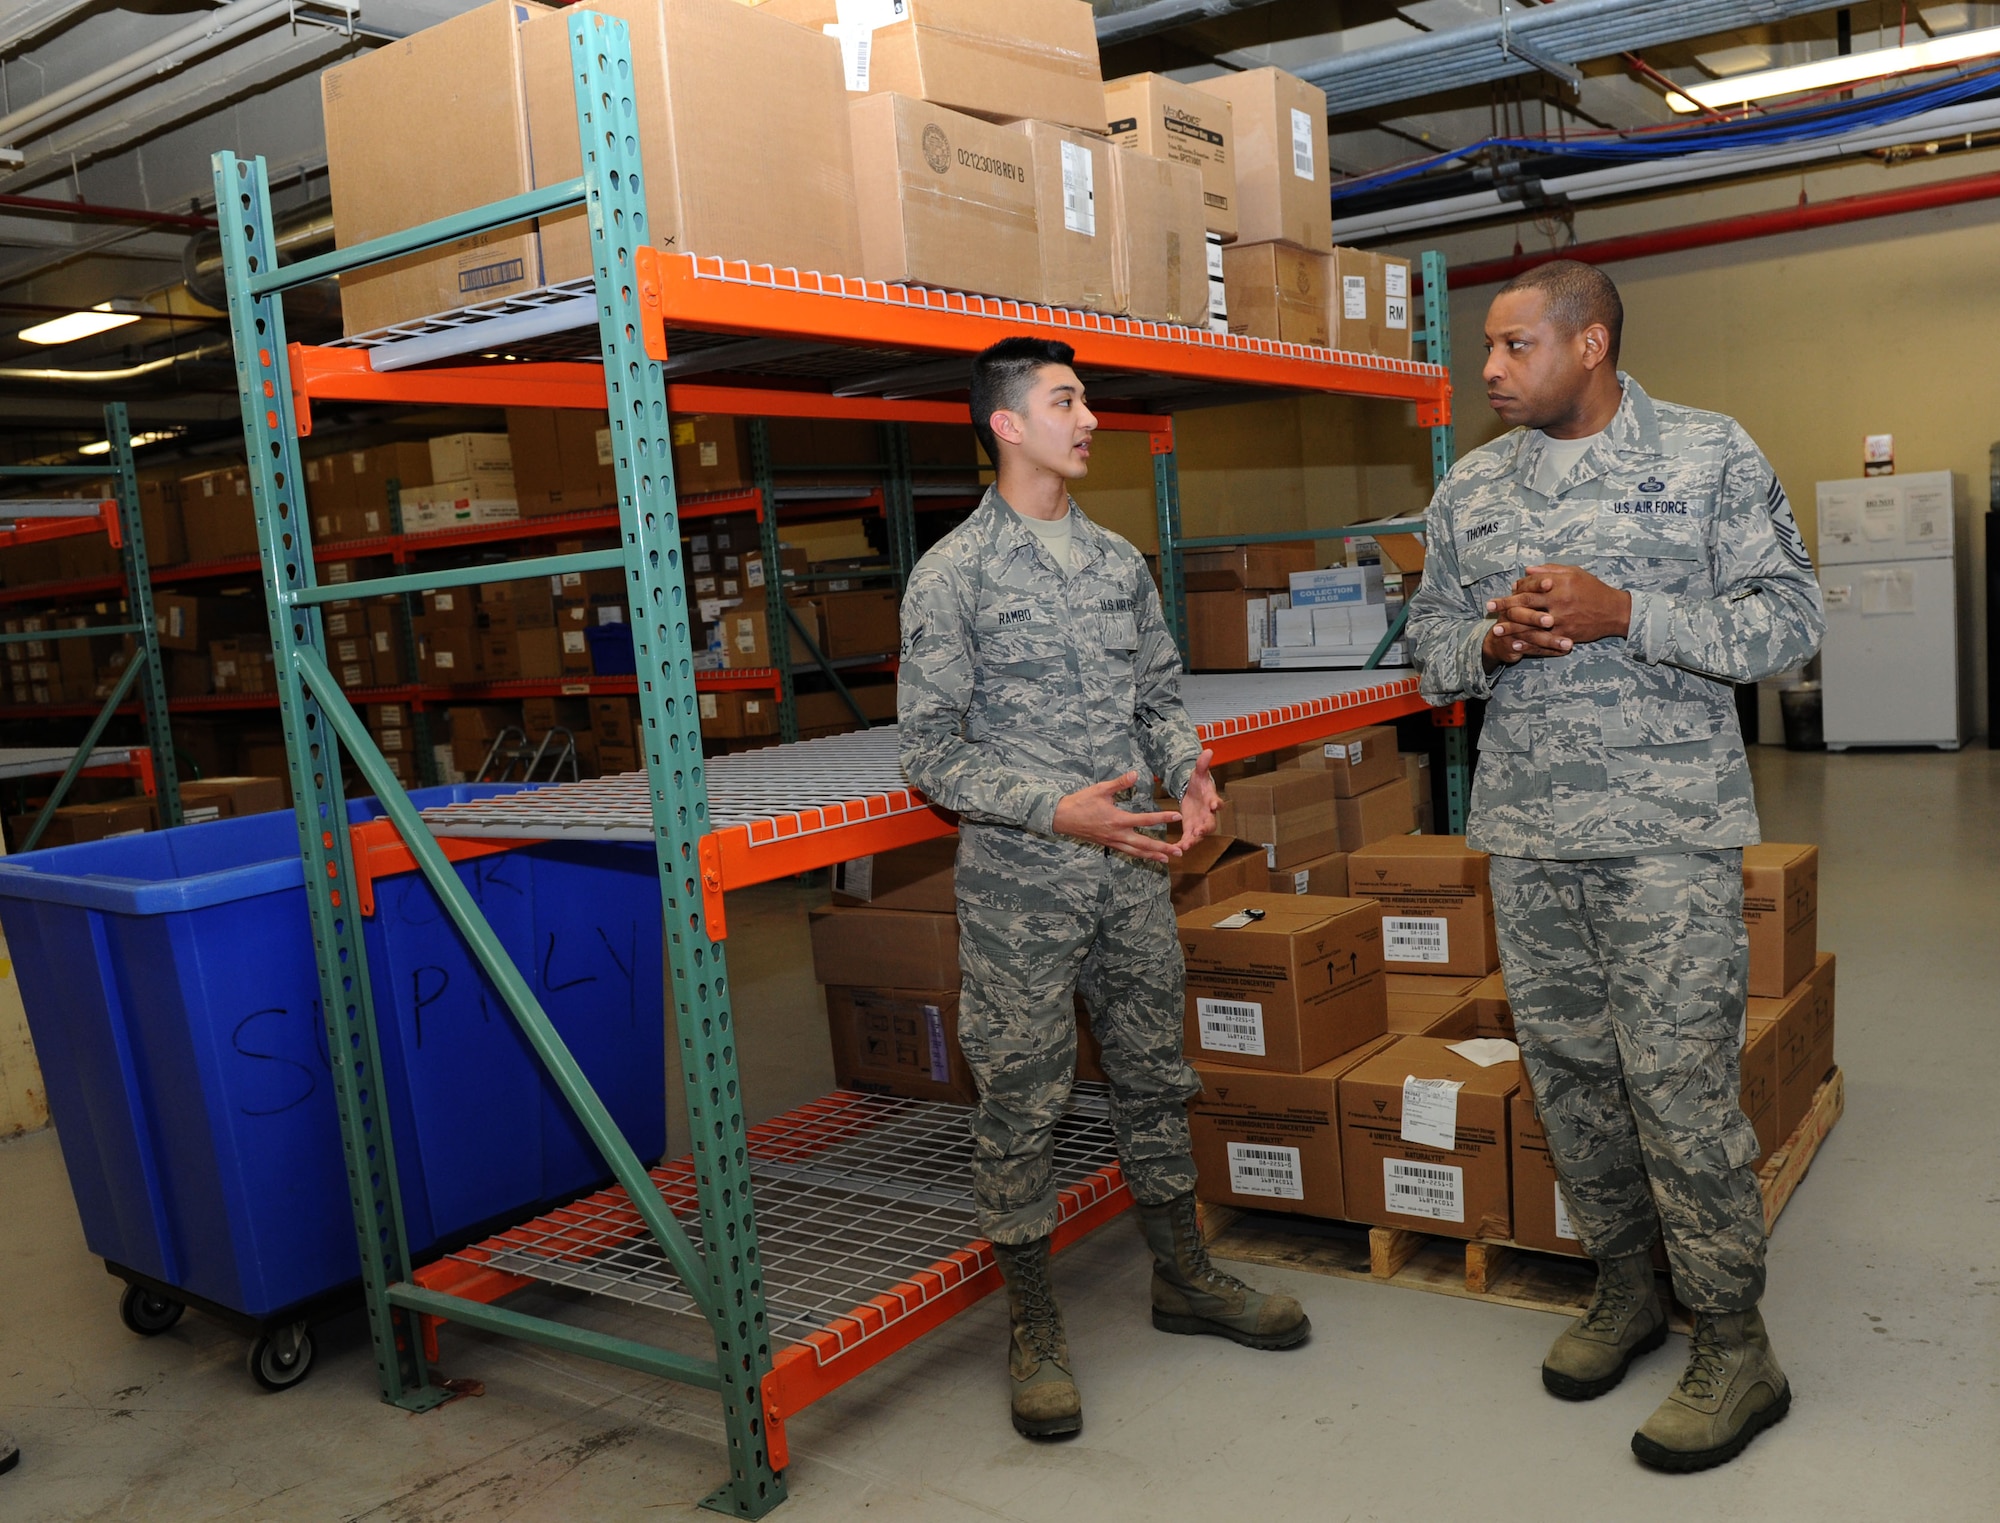 Airman 1st Class Jason Rambo, 81st Medical Support Squadron medical logistics technician, briefs Chief Master Sgt. Farrell Thomas, 2nd Air Force command chief, on medical logistics during an immersion tour at the Keesler Medical Center Mar.8, 2016, Keesler Air Force Base, Miss. Thomas visited the 81st Medical Group to become oriented with group missions, operations and personnel. (U.S. Air Force photo by Kemberly Groue)